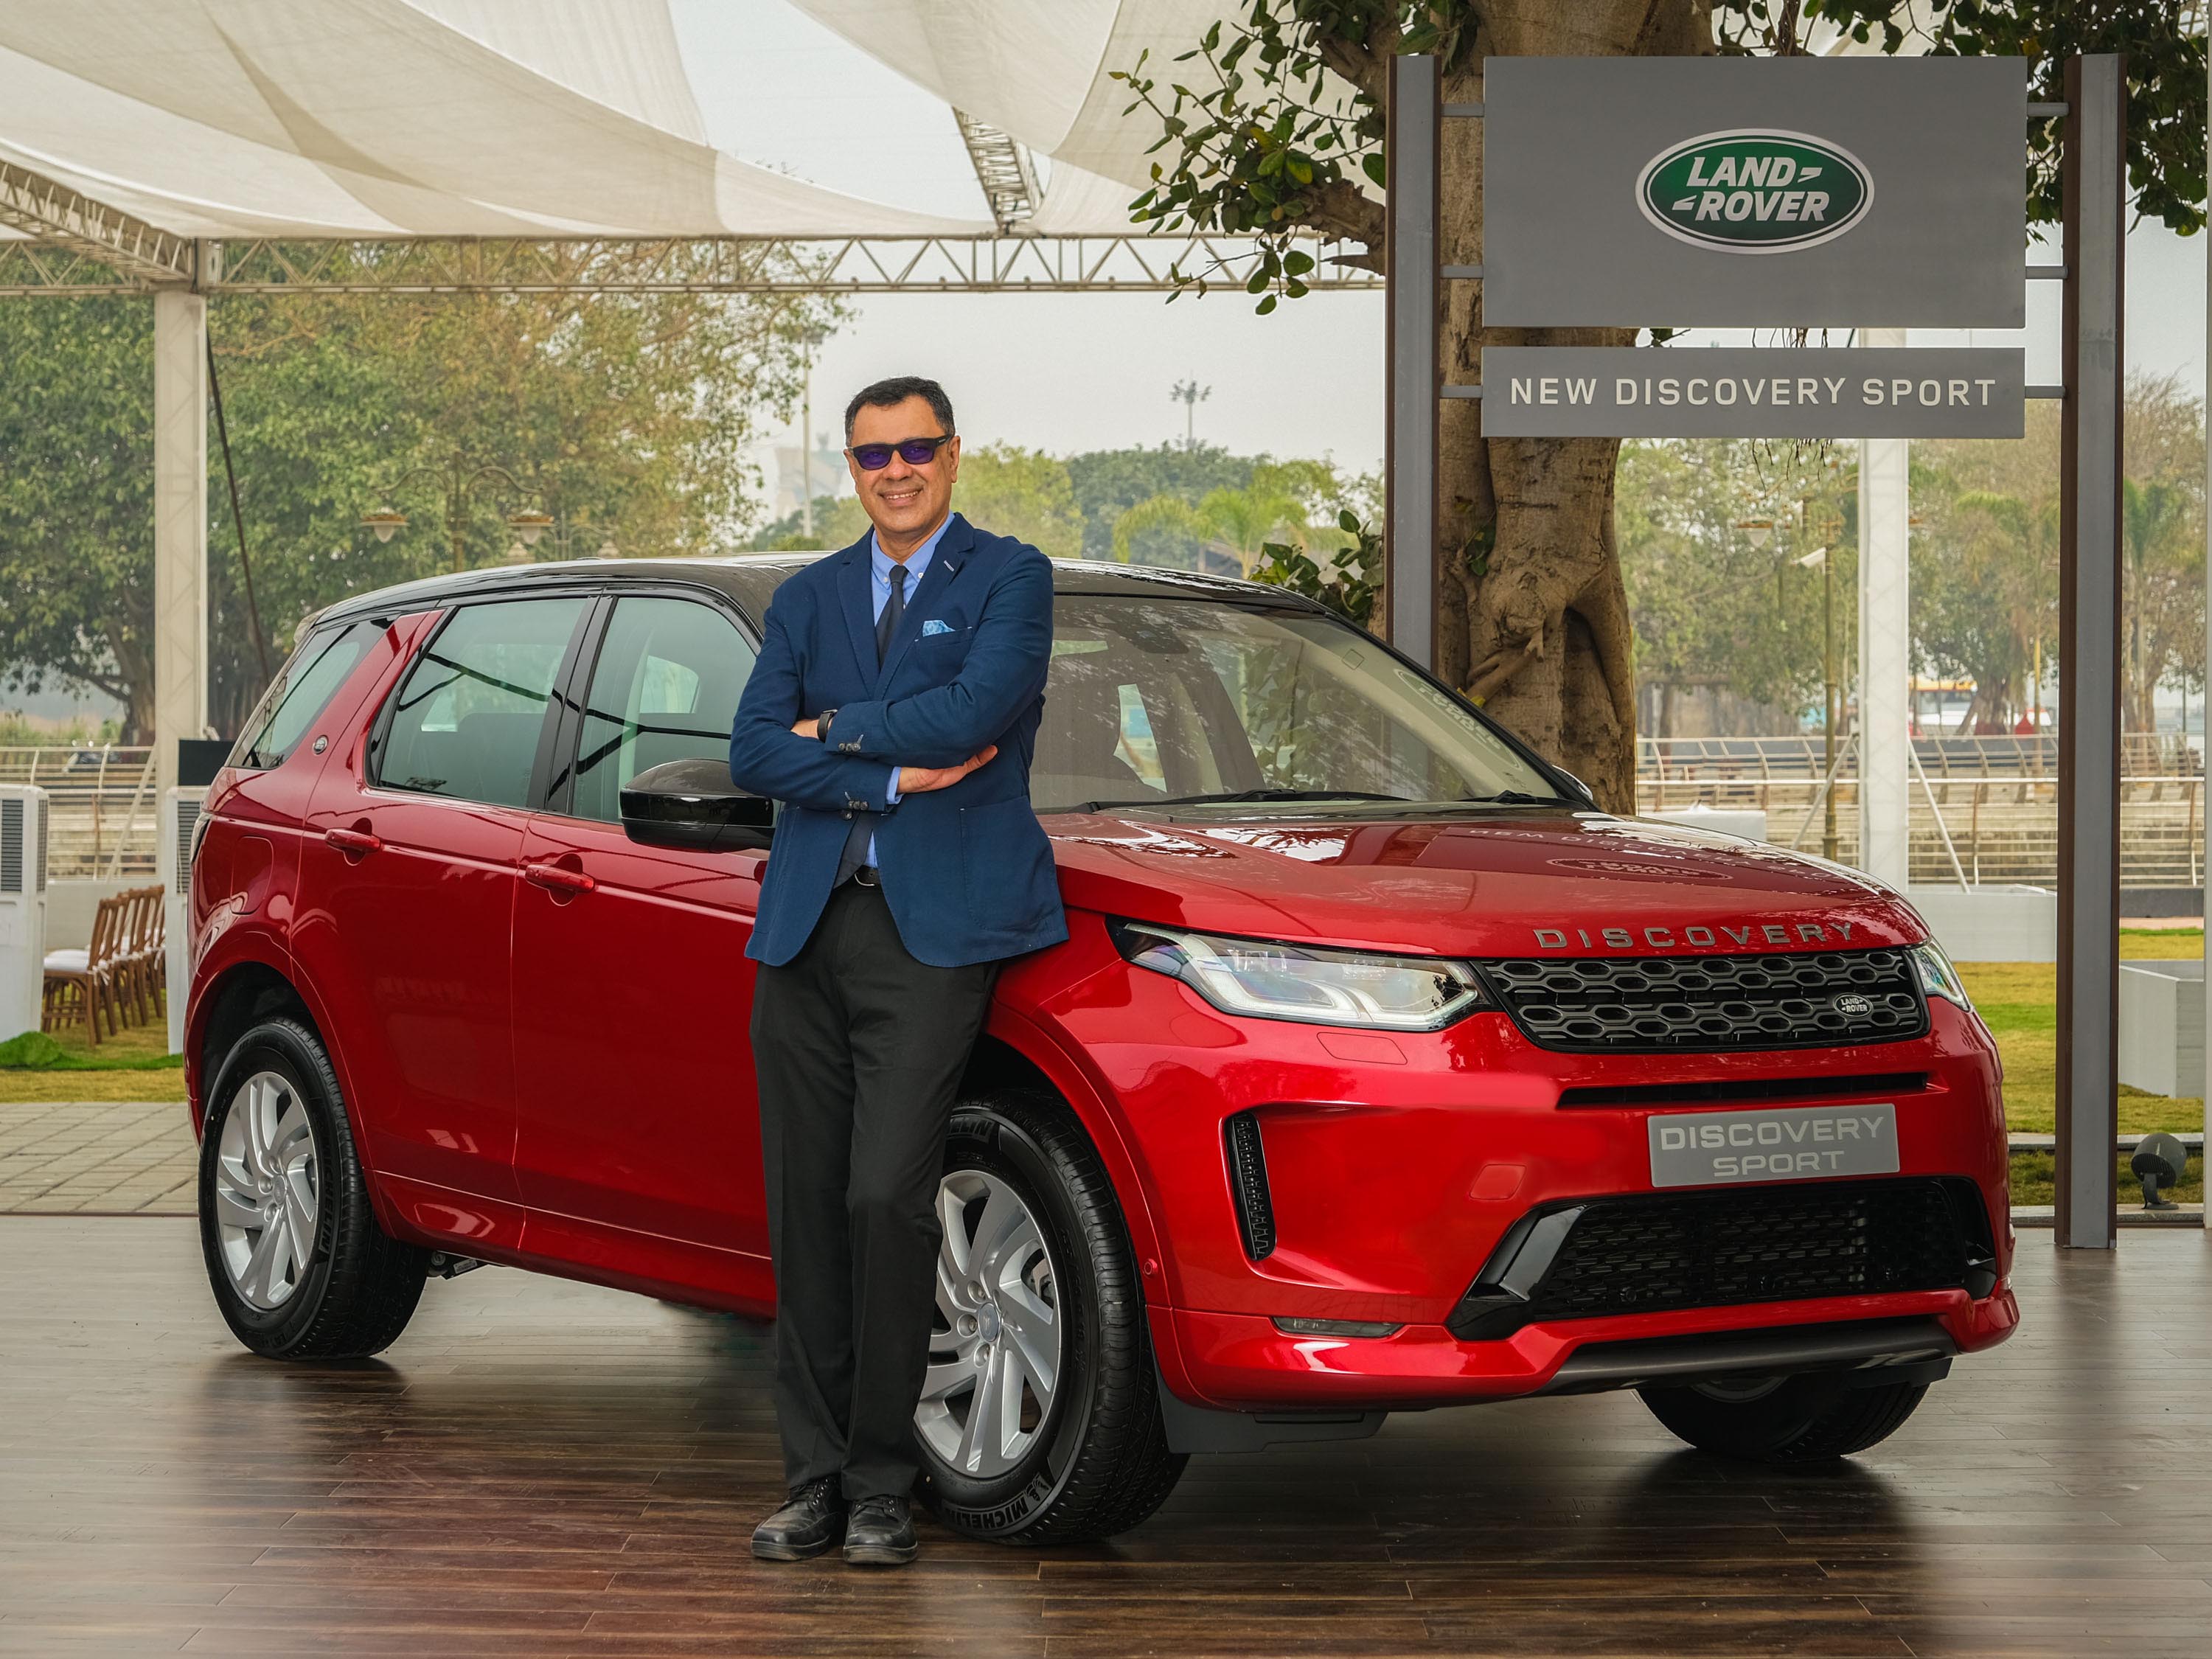 LAND ROVER ENHANCES THE NEW DISCOVERY SPORT  WITH ADDED REFINEMENT AND VERSATILITY